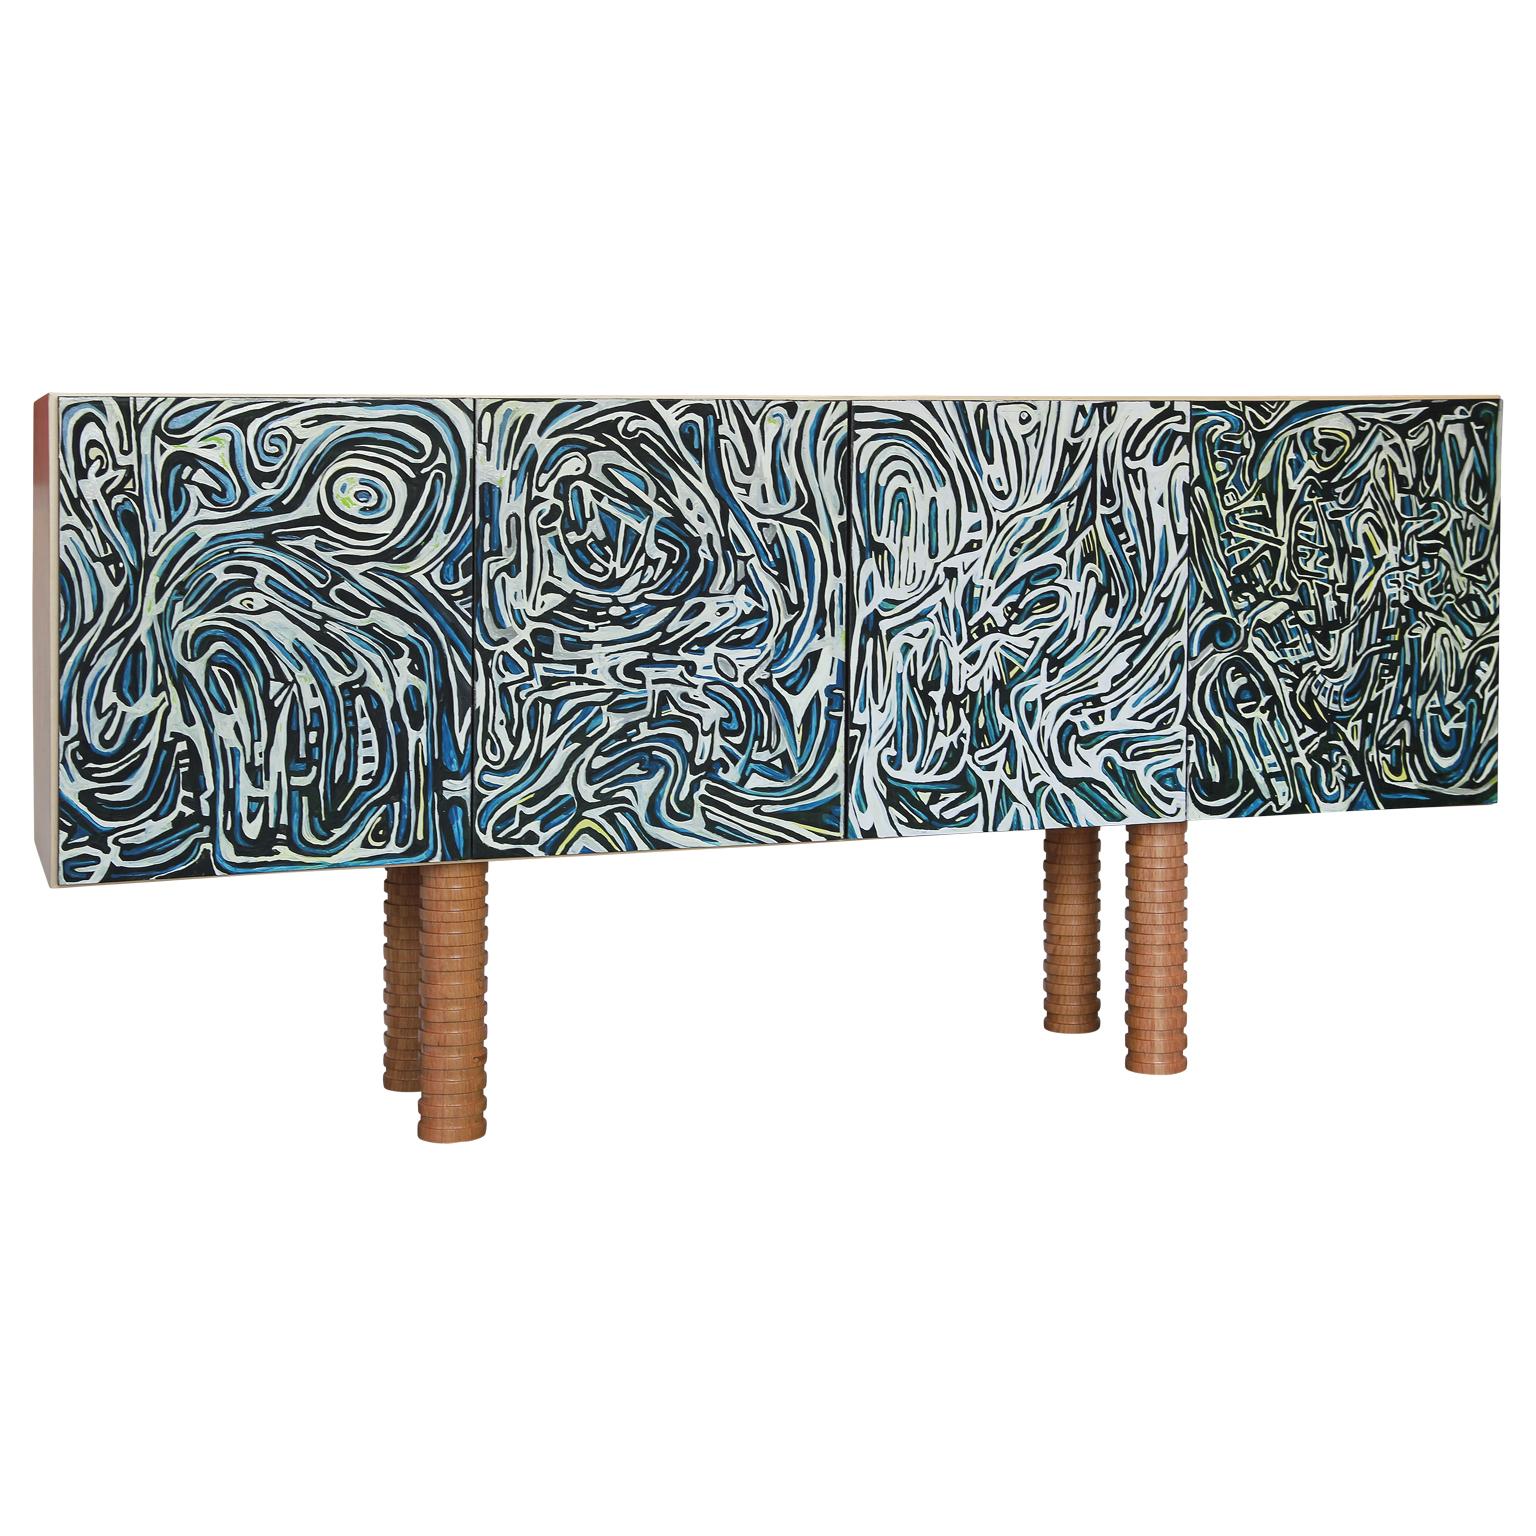 Fantastic custom painted abstract geometric sideboard by Michael Abramowitz X Reeves Art + Design.
Handmade in Houston Texas, this sideboard has four painted doors in blue, white, and black. Turned scalloped legs out of oak sit below. The interior